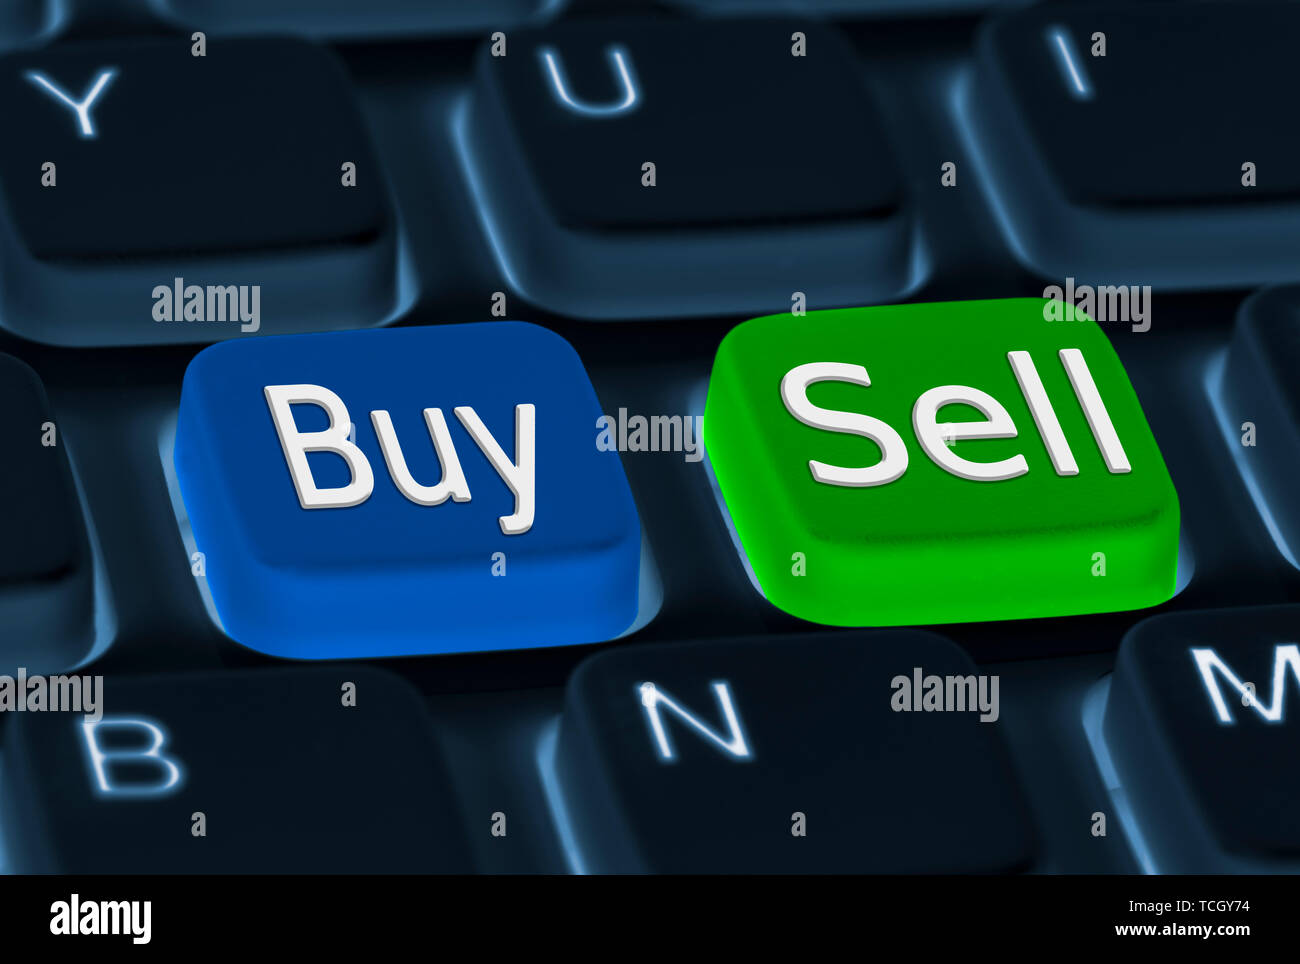 Buy and Sell buttons on a computer keyboard. Buying and selling concept. Stock Photo